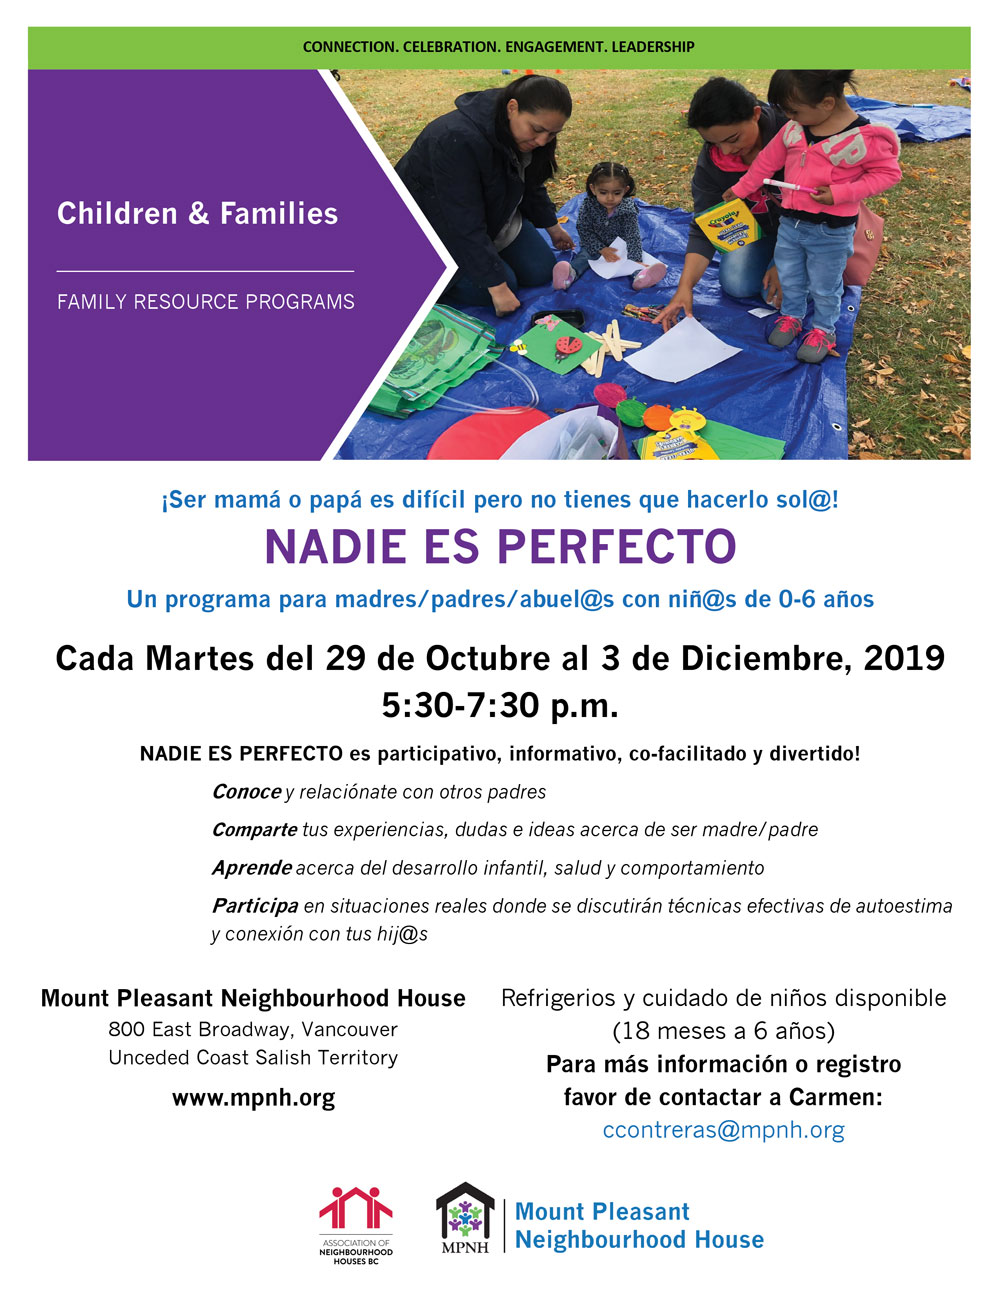 An image of the poster with program details, featuring a photo of two parents and two children doing arts and crafts at the park